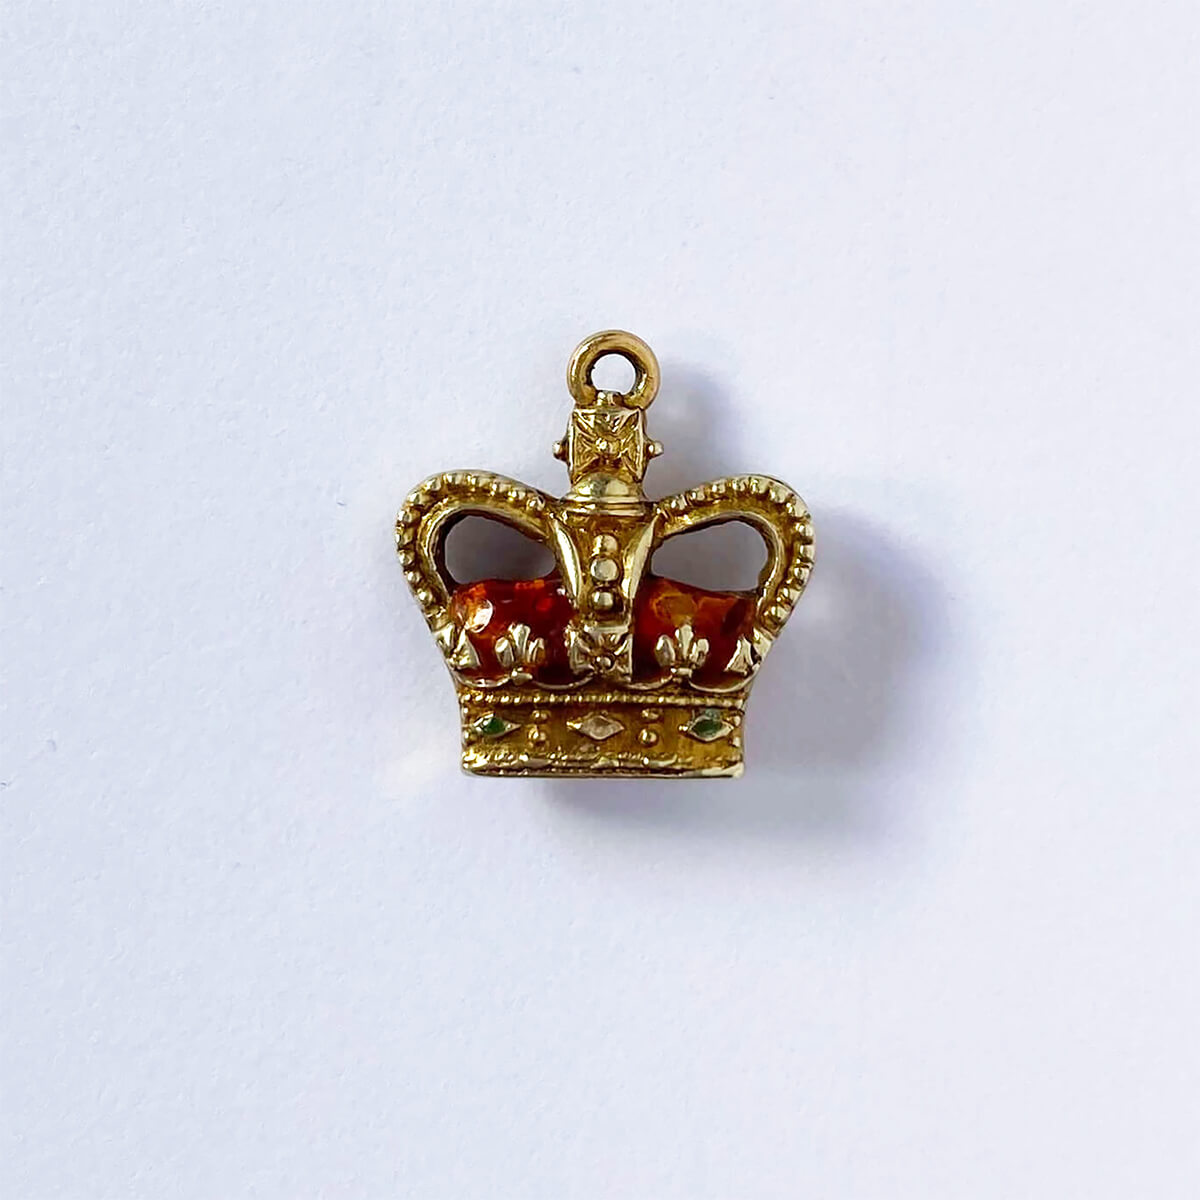 C&F 9ct gold and red enamel crown charm royalty pendant from Charmarama